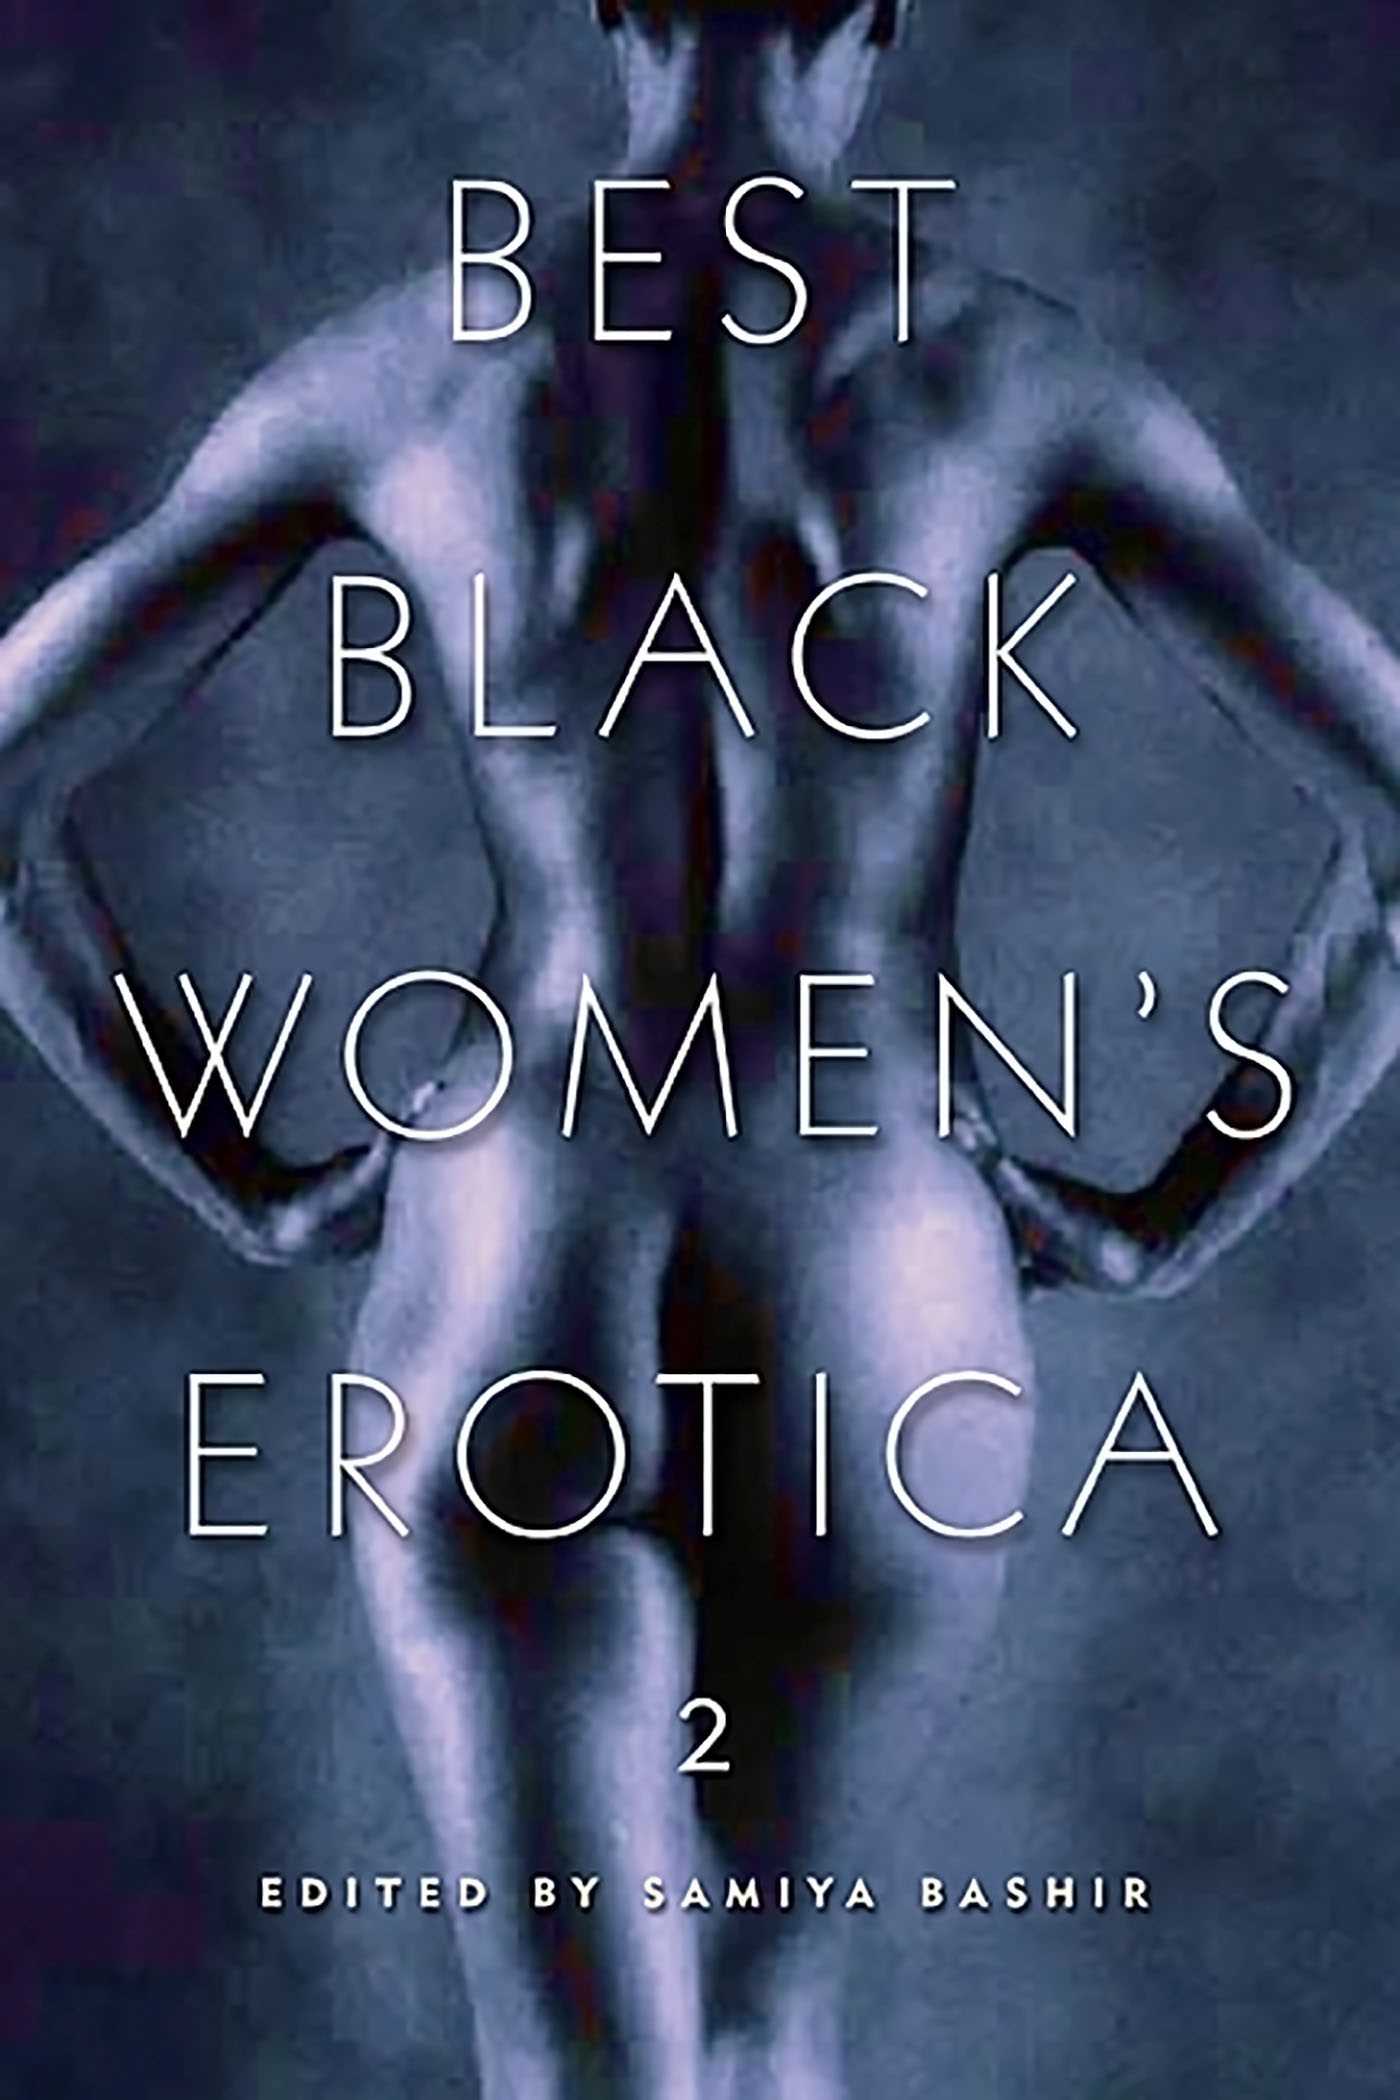 best of And literature Womens erotica